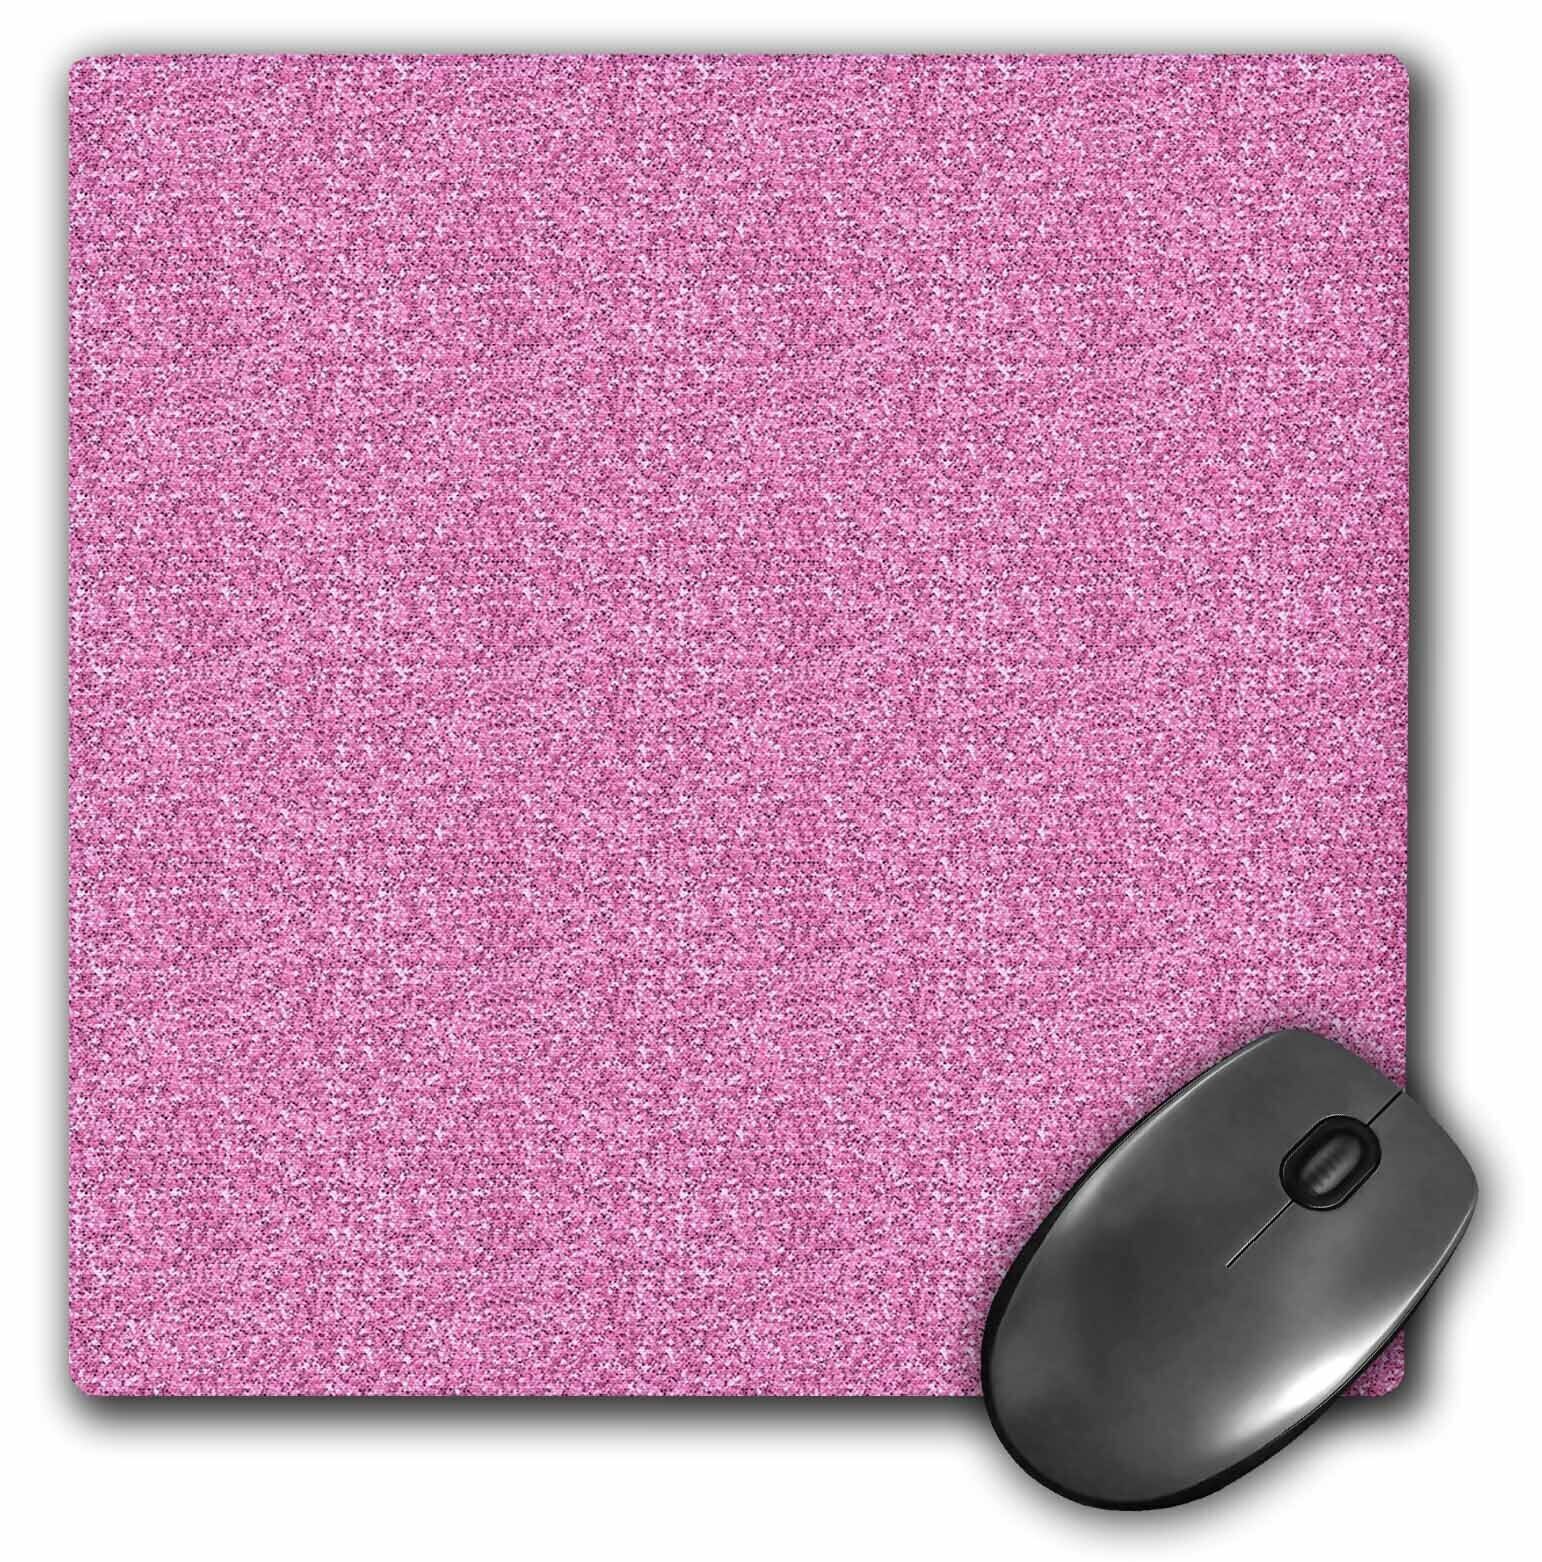 3dRose Girly Pink Glitter Glitzy Glam Sparkly Art MousePad